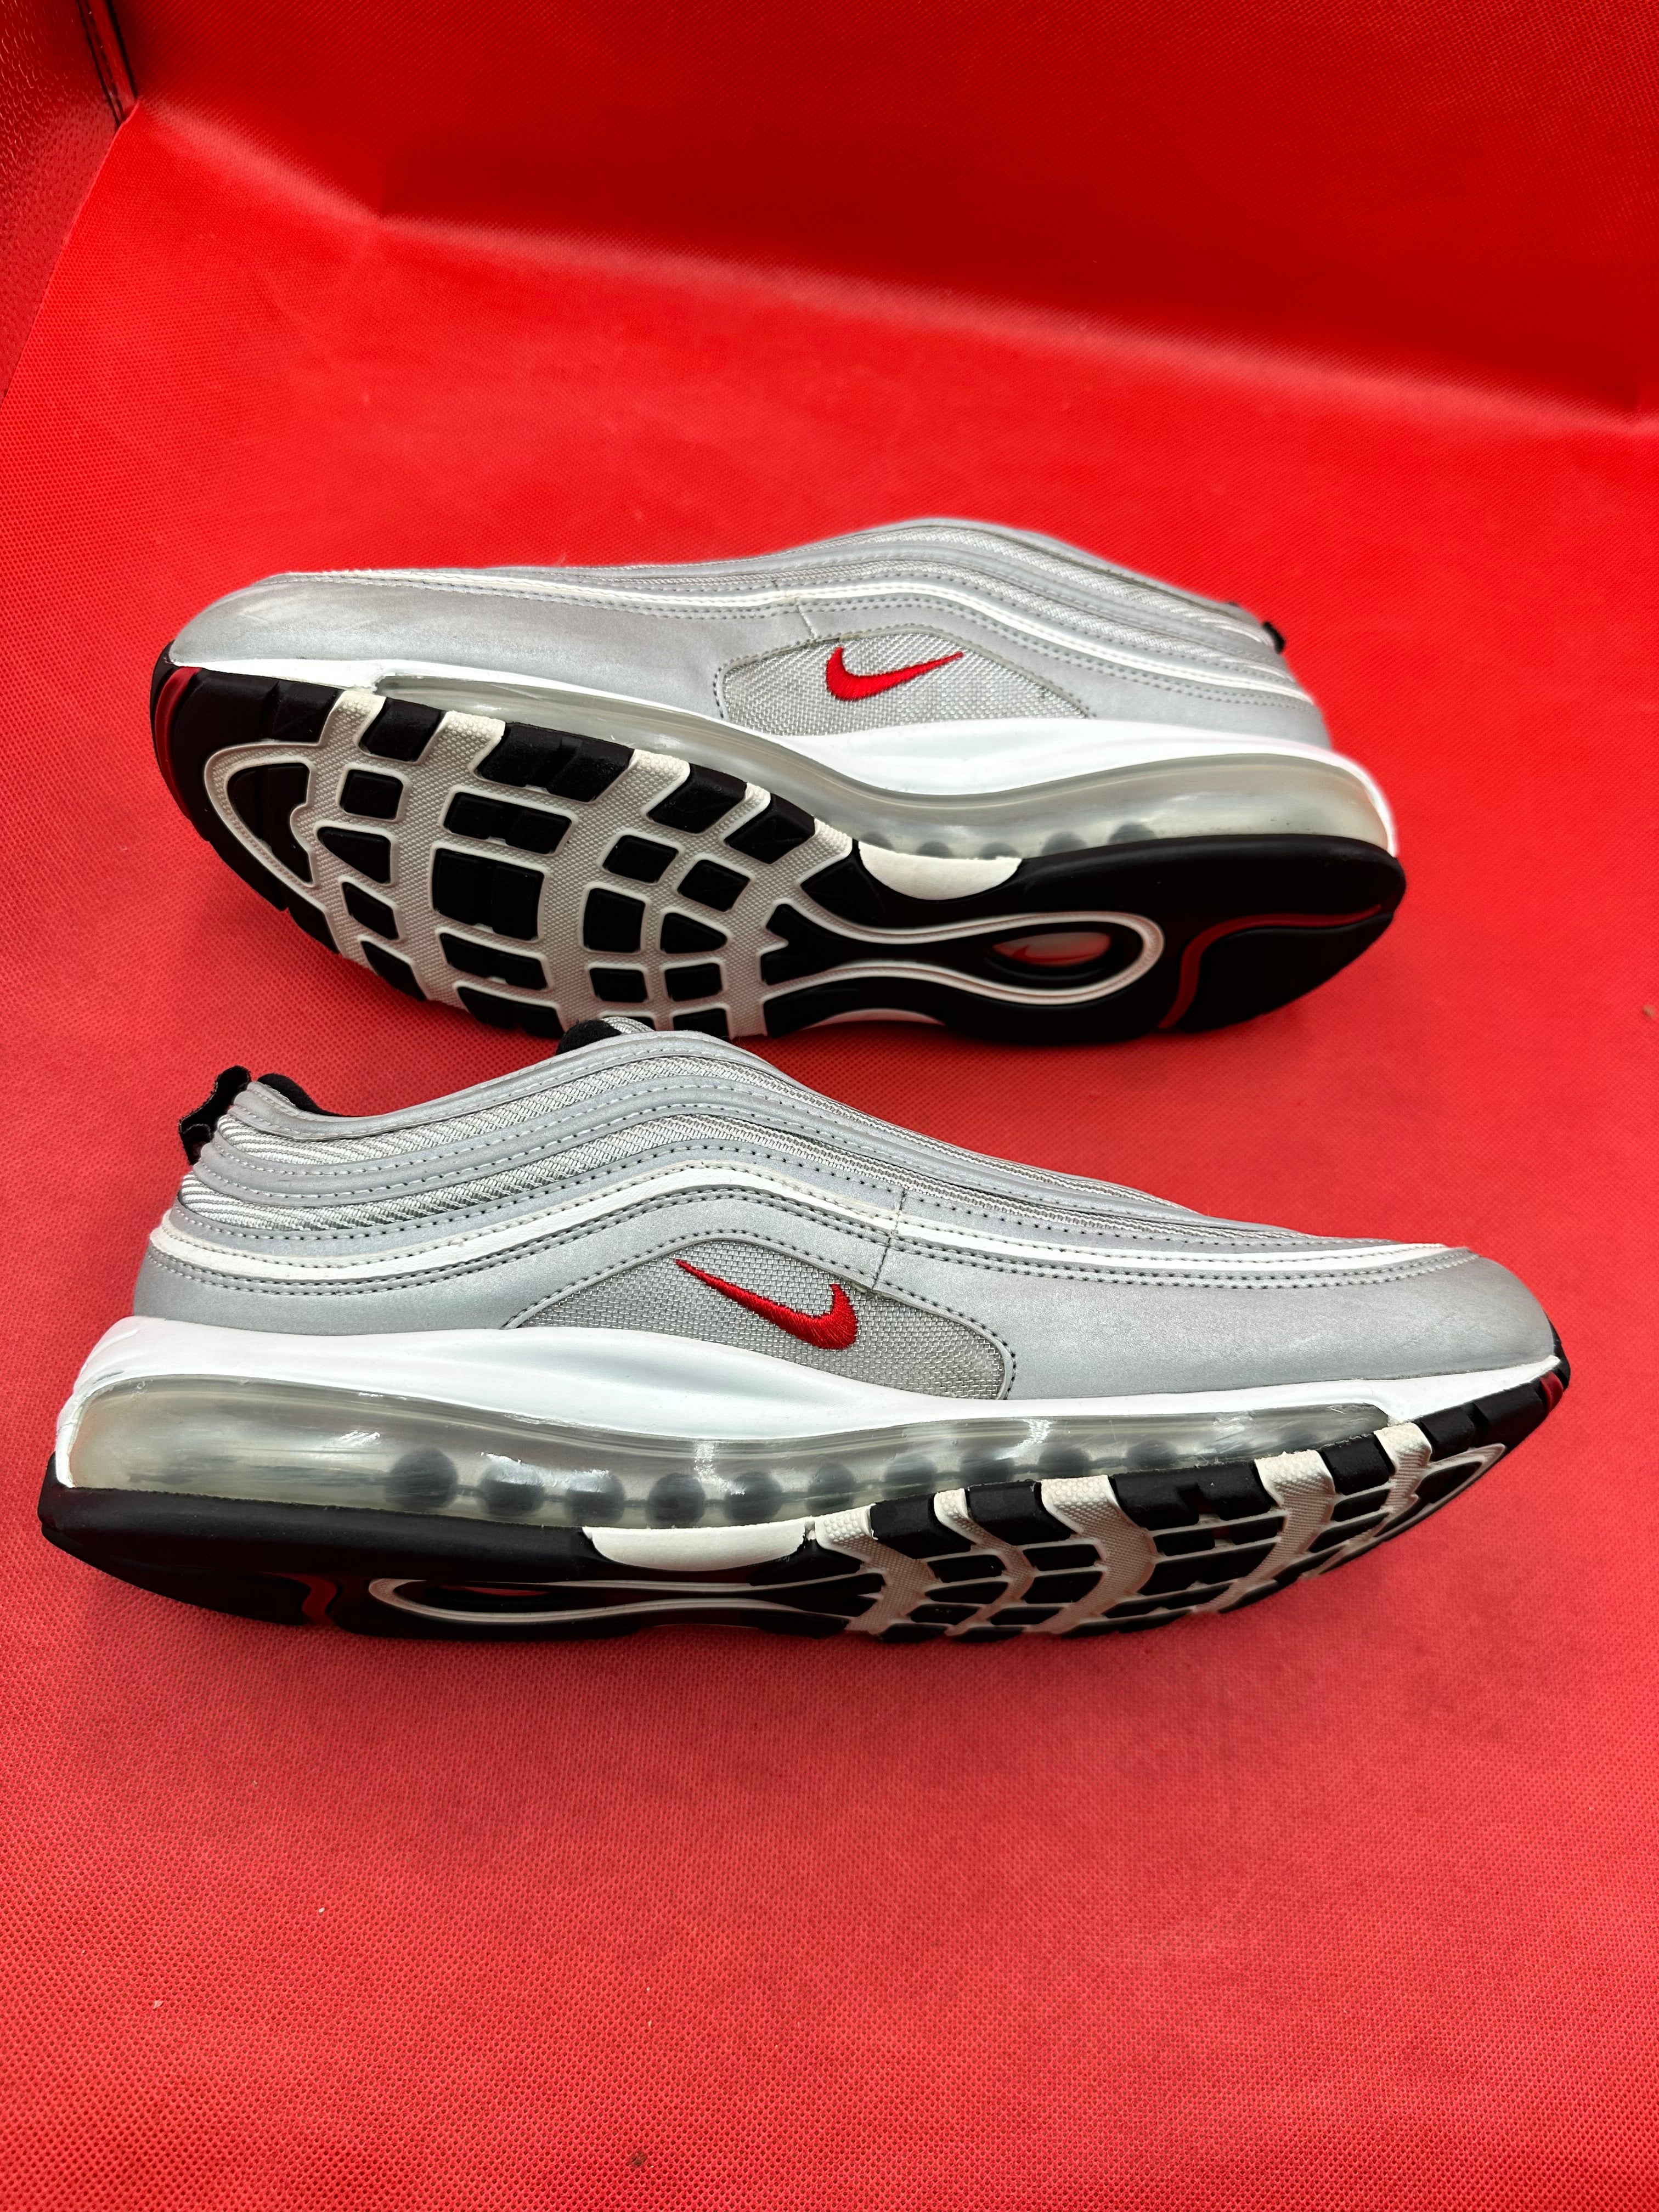 Silver Bullet Nike Air max 97s size 11